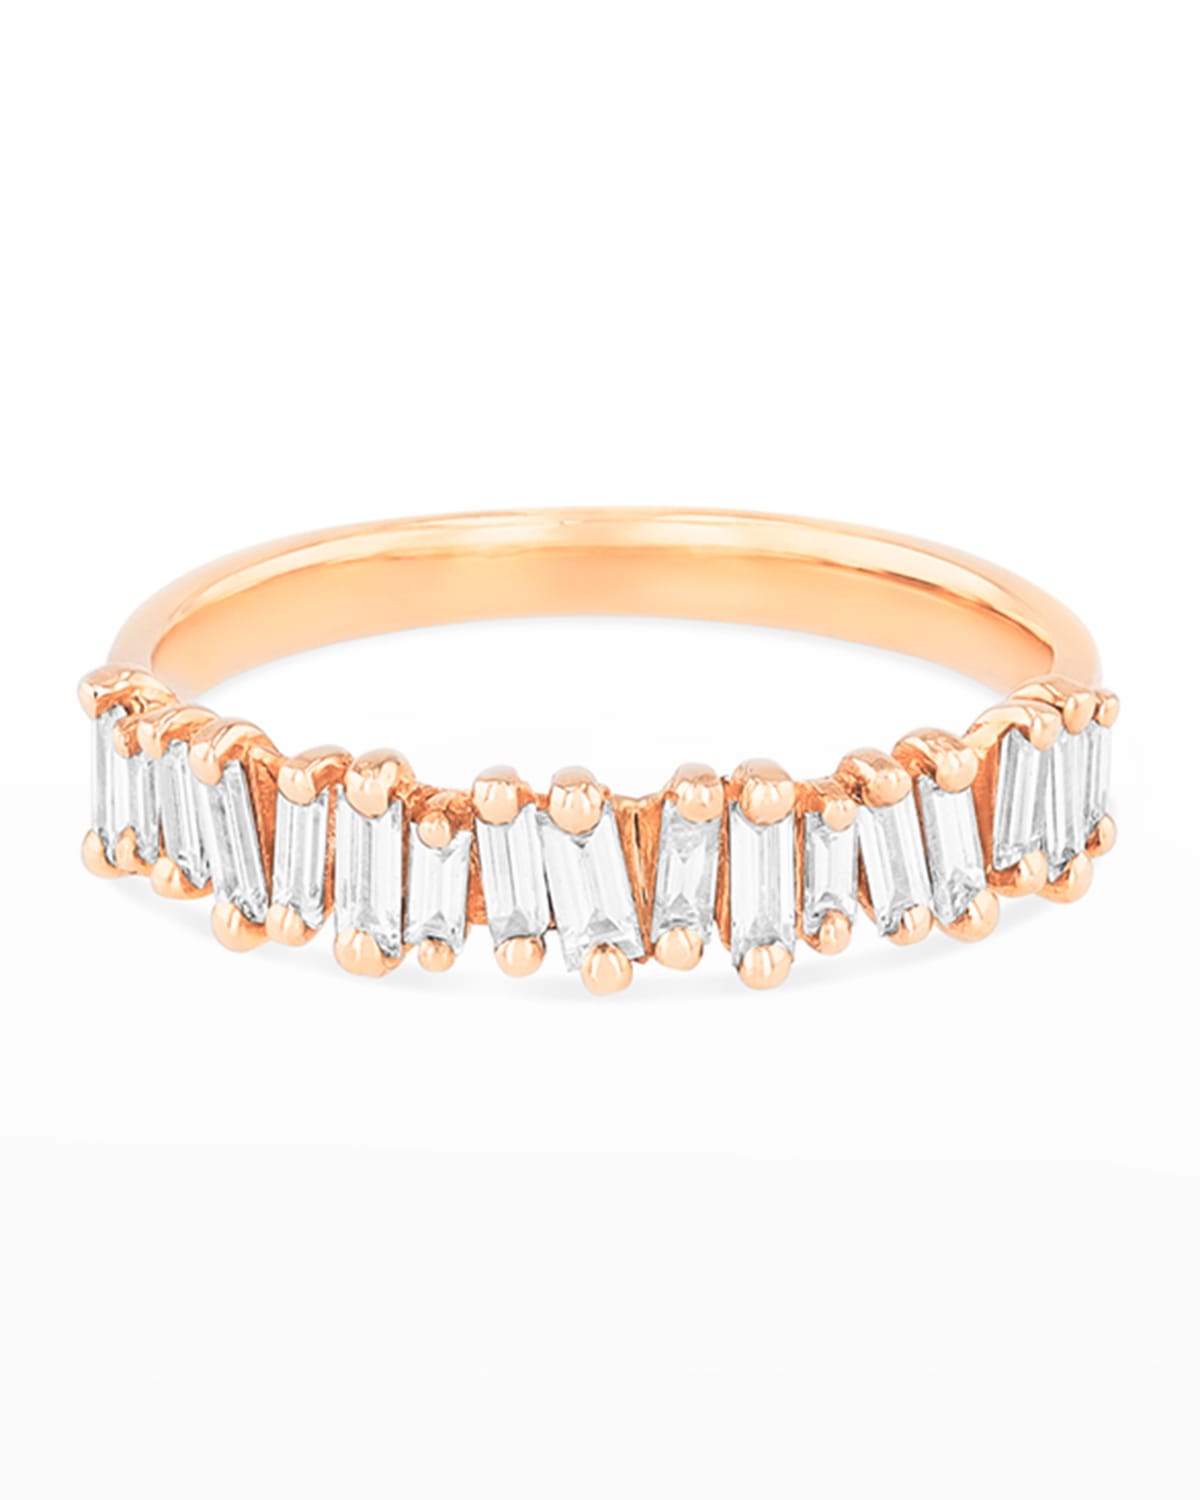 Suzanne Kalan 18k Diamond Classic Fireworks Half-band Ring Size 4.5-8 In Rose/gold